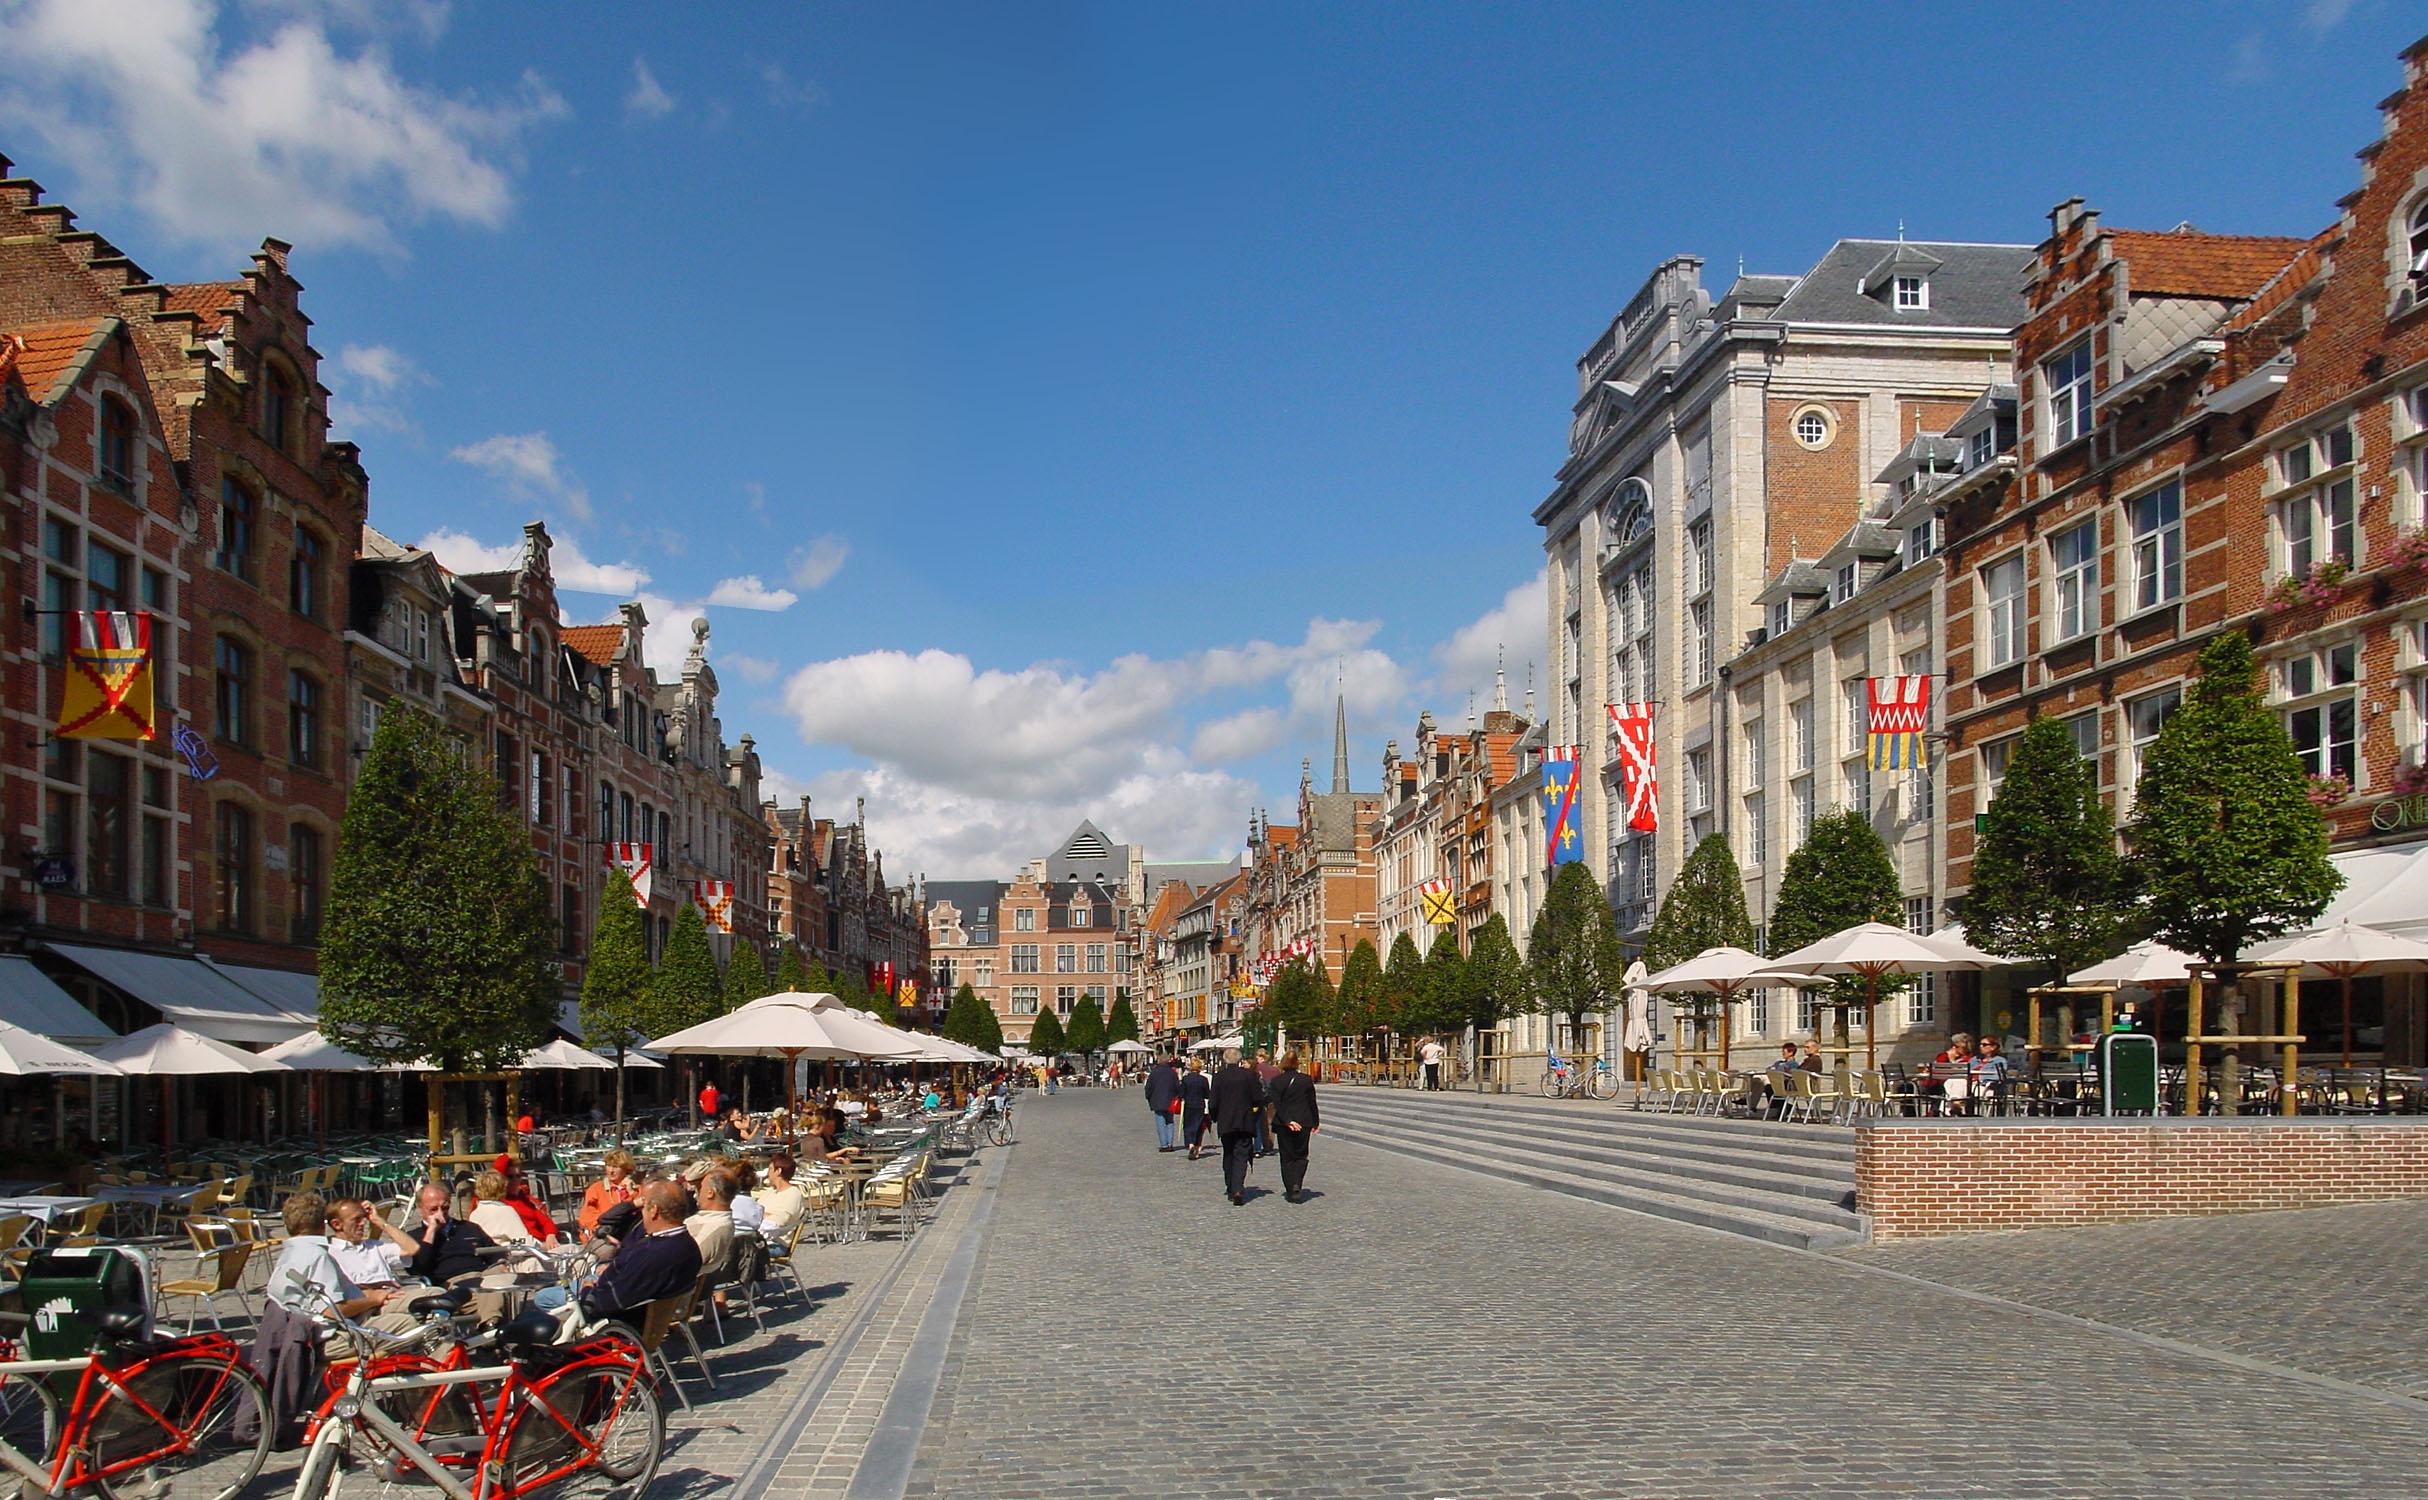 Cover image of this place Oude Markt